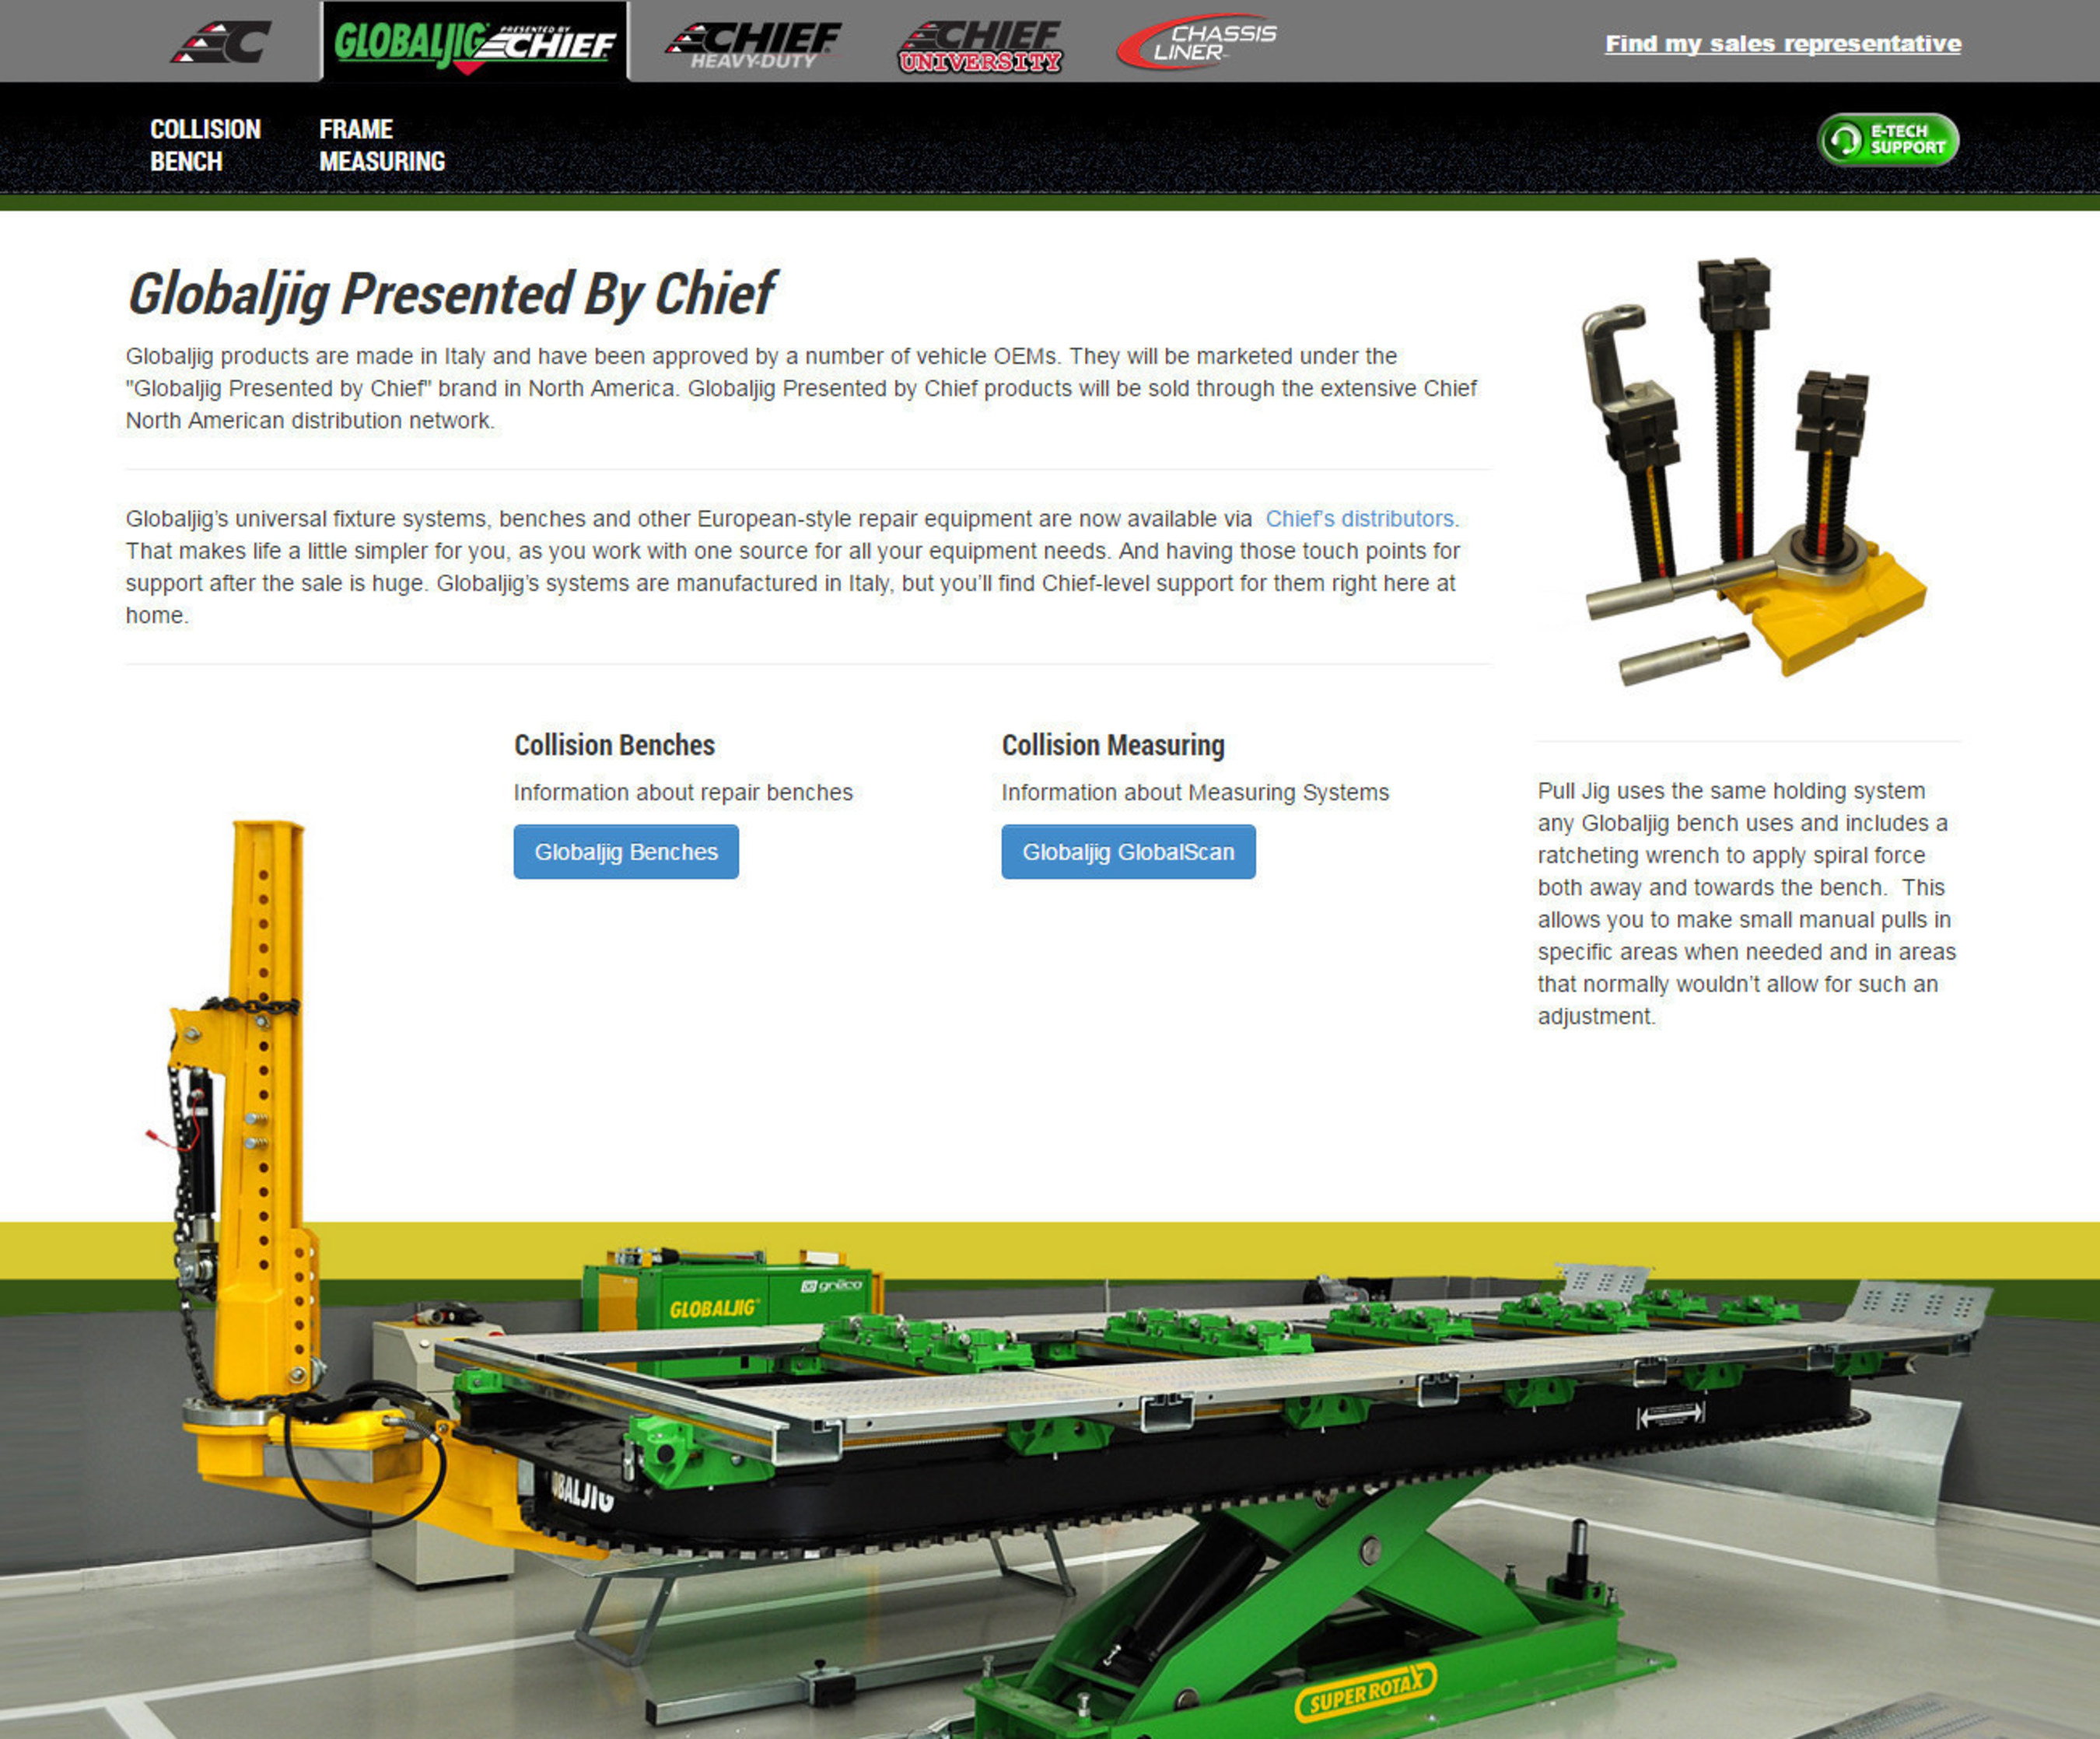 The Globaljig(R) Presented by Chief(R) line of benches and frame measuring equipment is featured in a new section of the Chief website at www.chiefautomotive.com/Global-Jig/. The user-friendly site uses visual images to help guide visitors through the Globaljig product lineup.